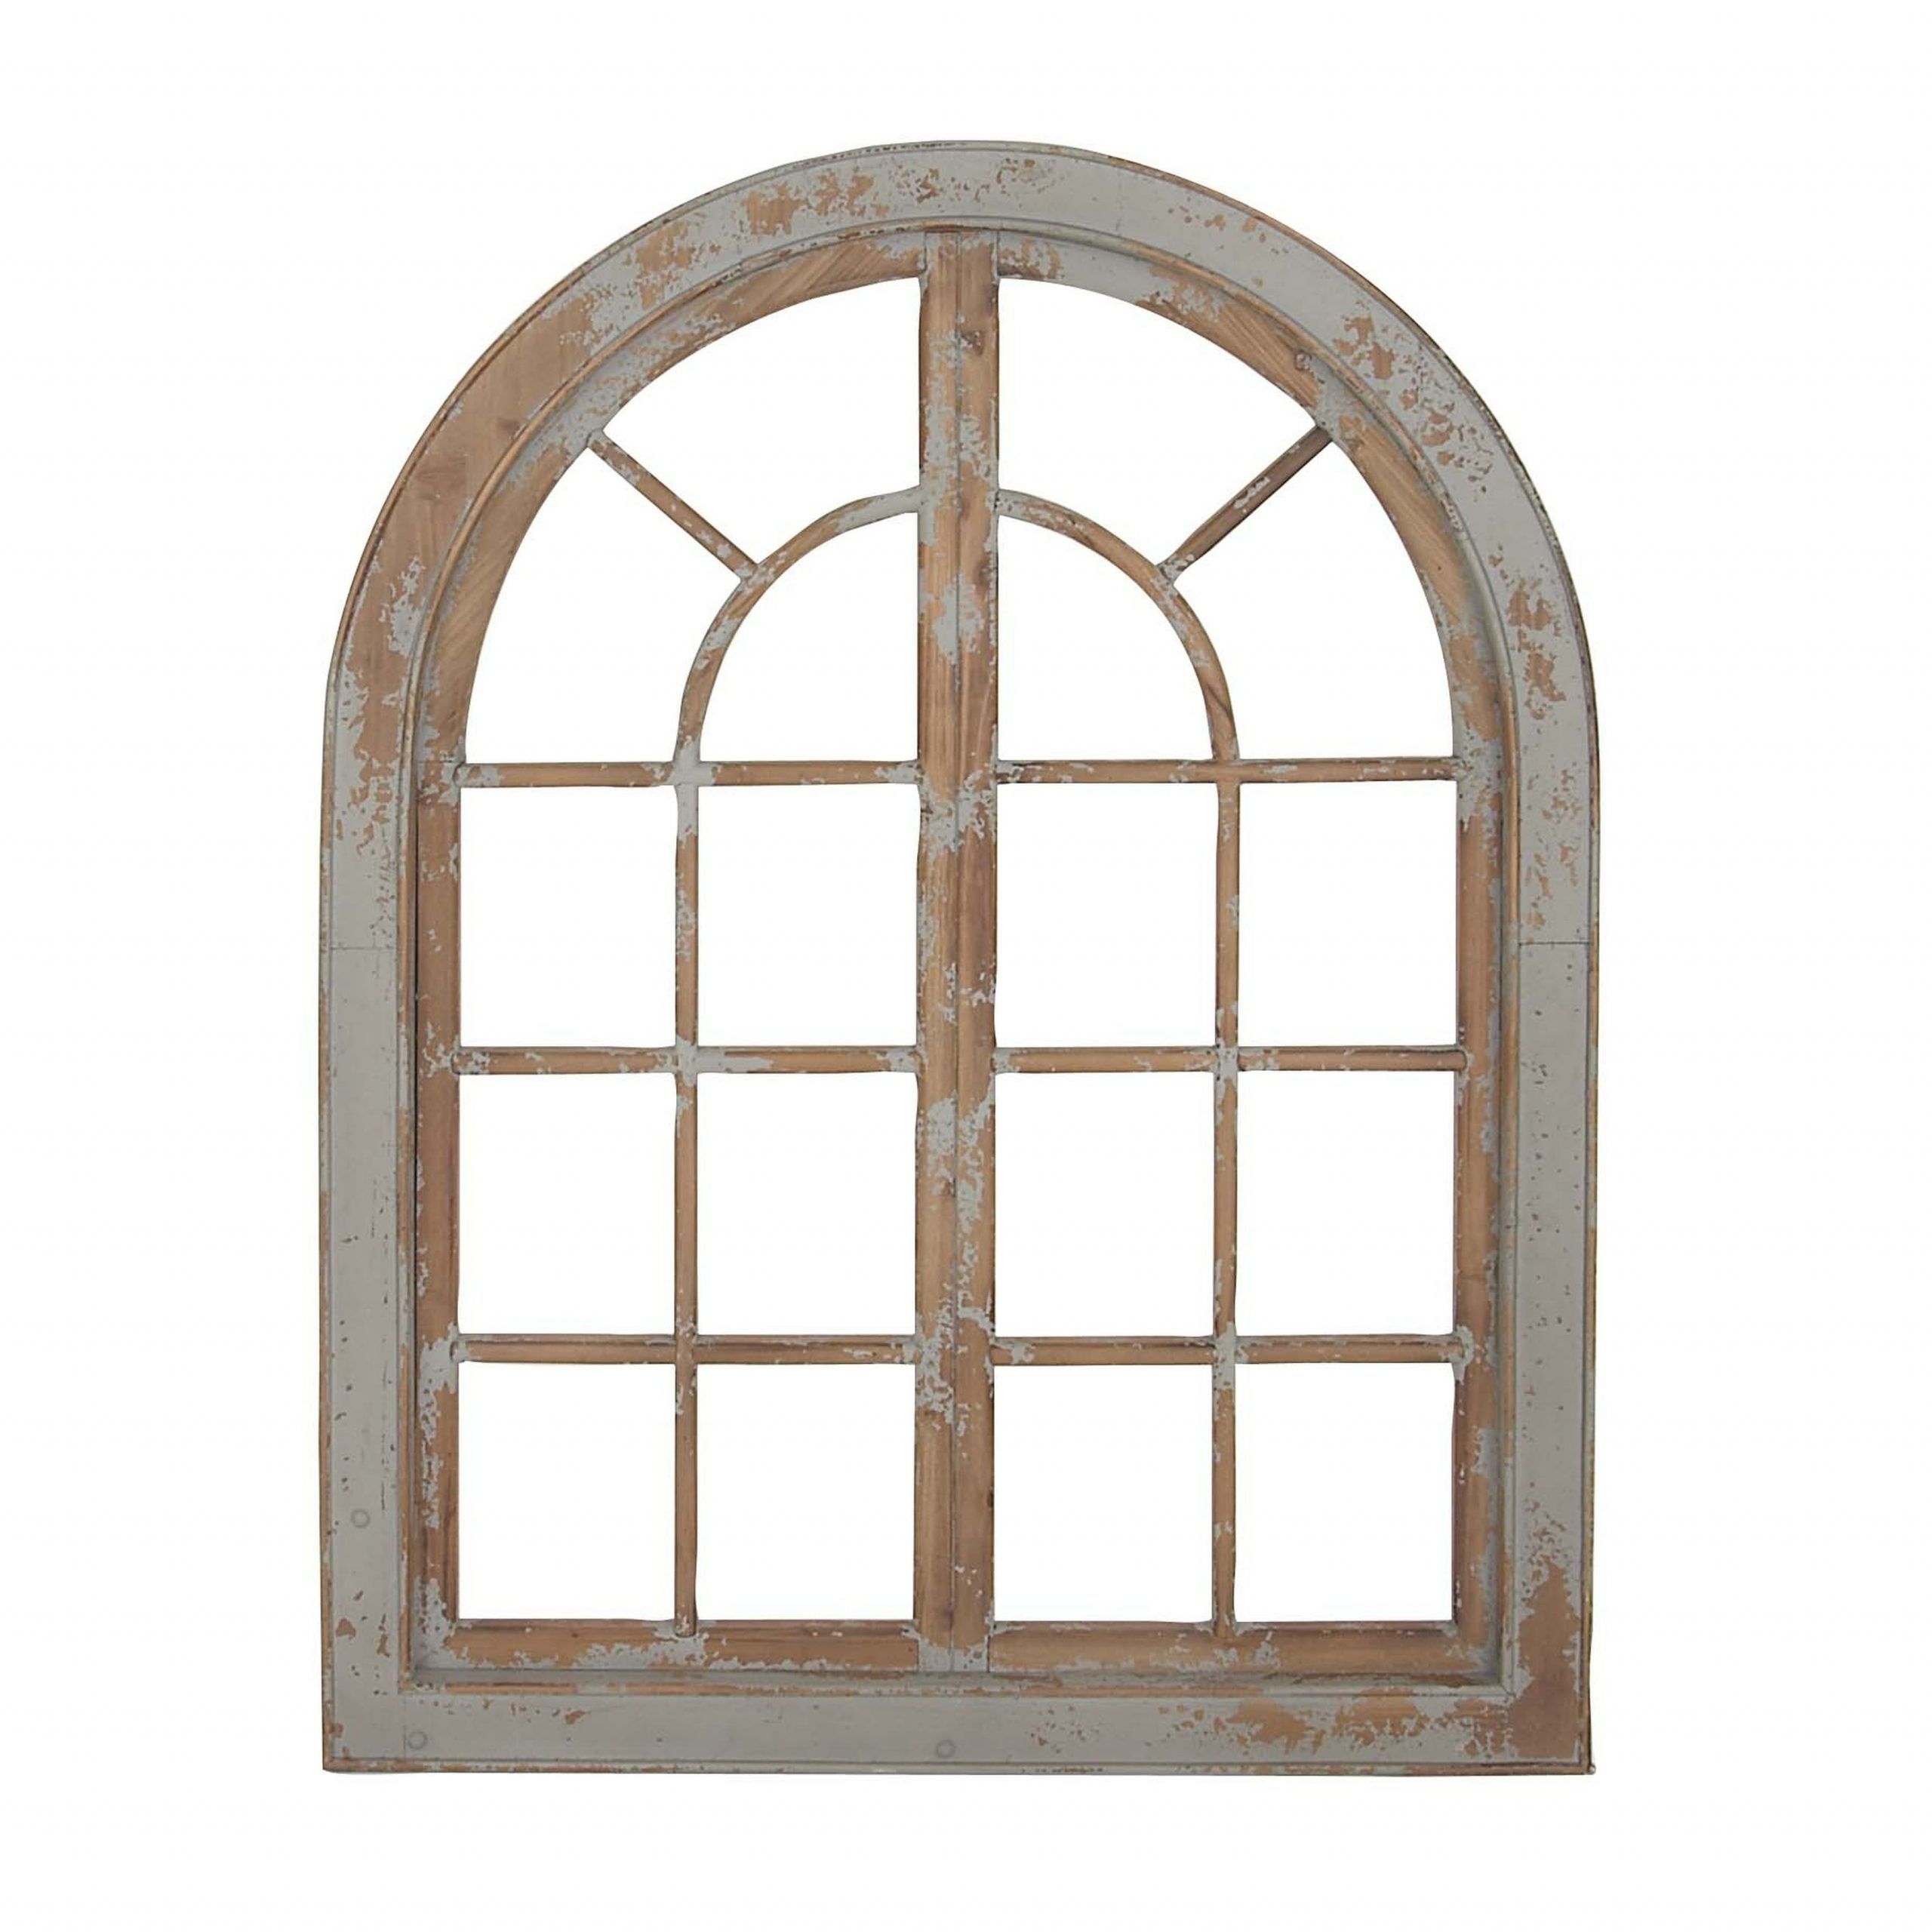 Distressed Rustic Southwest Arched Brown Wood Metal Wall Art Panel Regarding Arched Metal Wall Art (View 14 of 15)